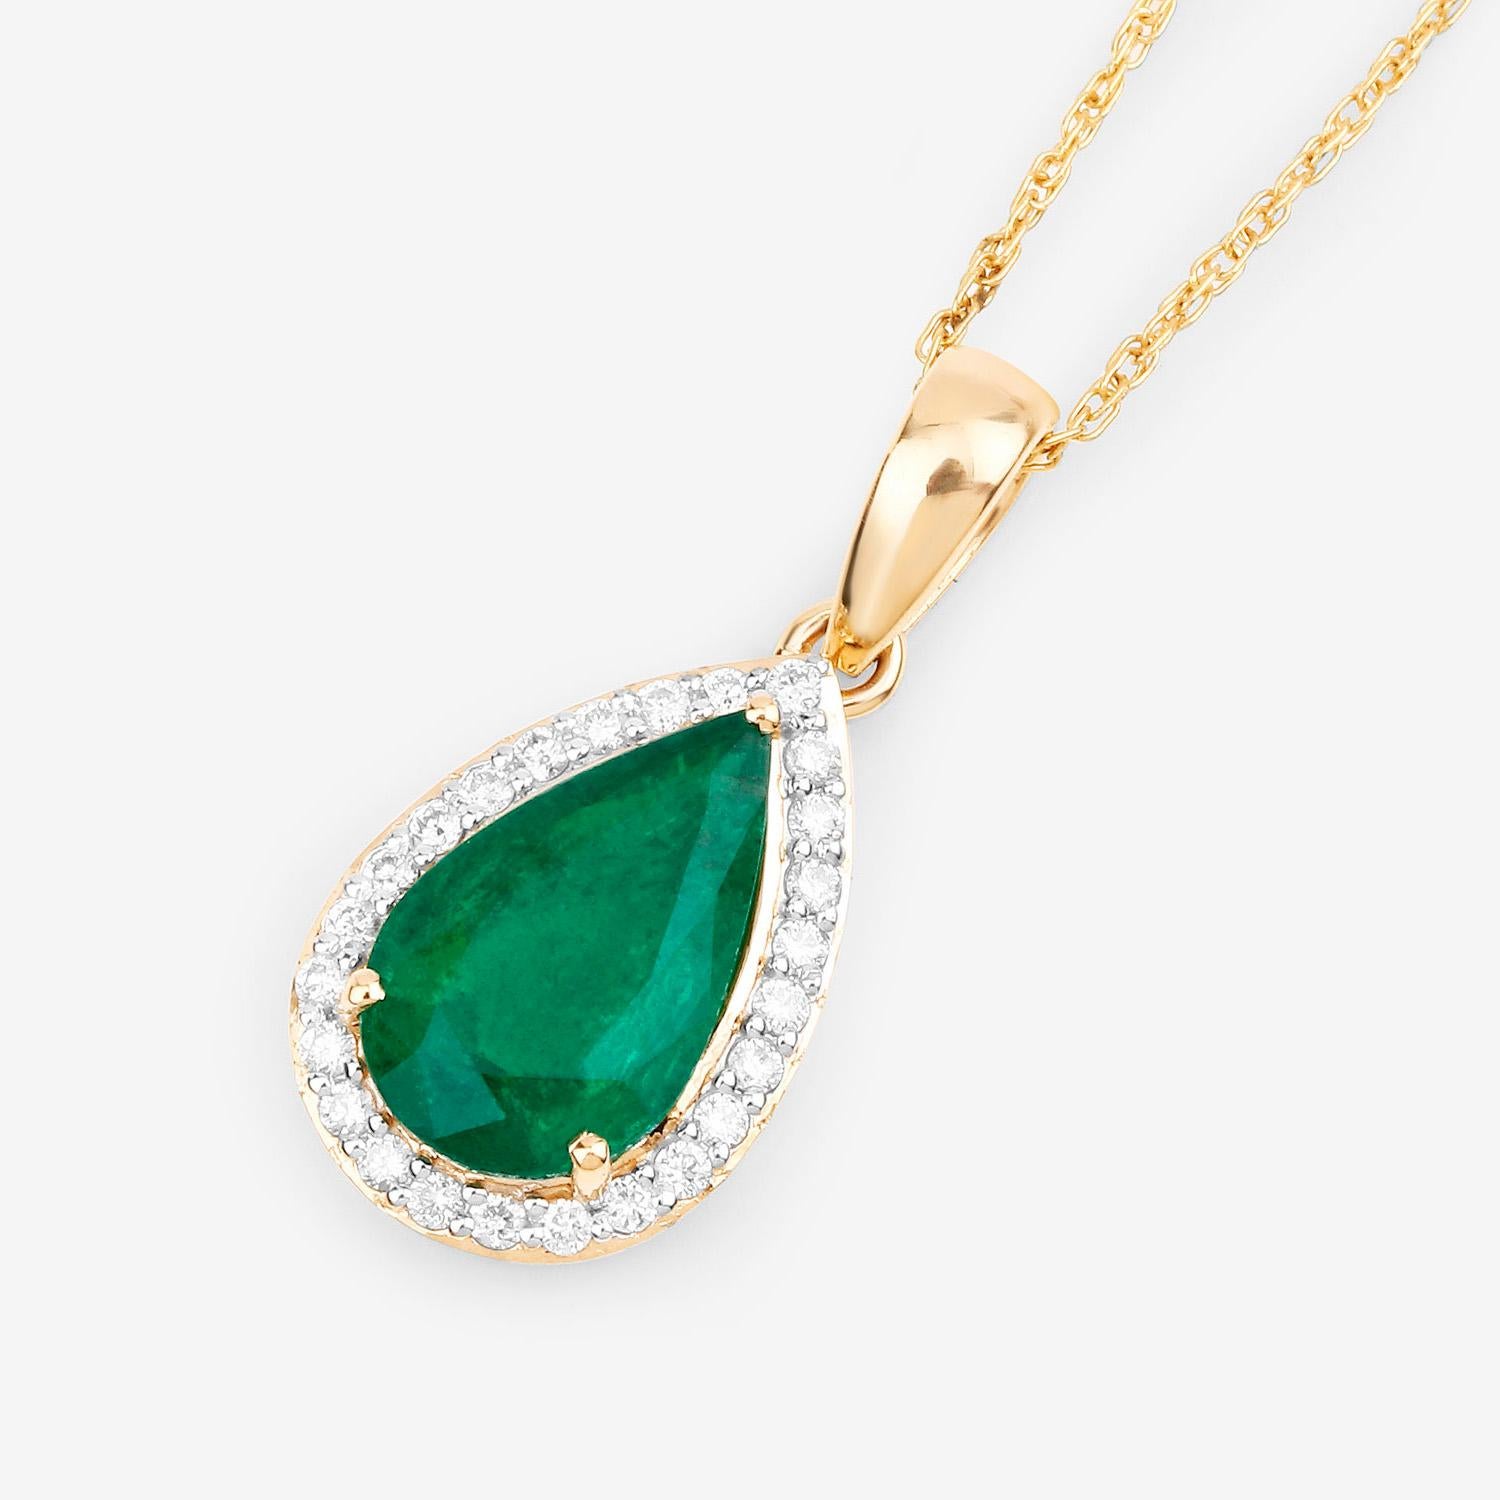 Pear Cut IGI Certified Zambian Emerald Necklace With Diamonds 1.76 Carats 14K Yellow Gold For Sale